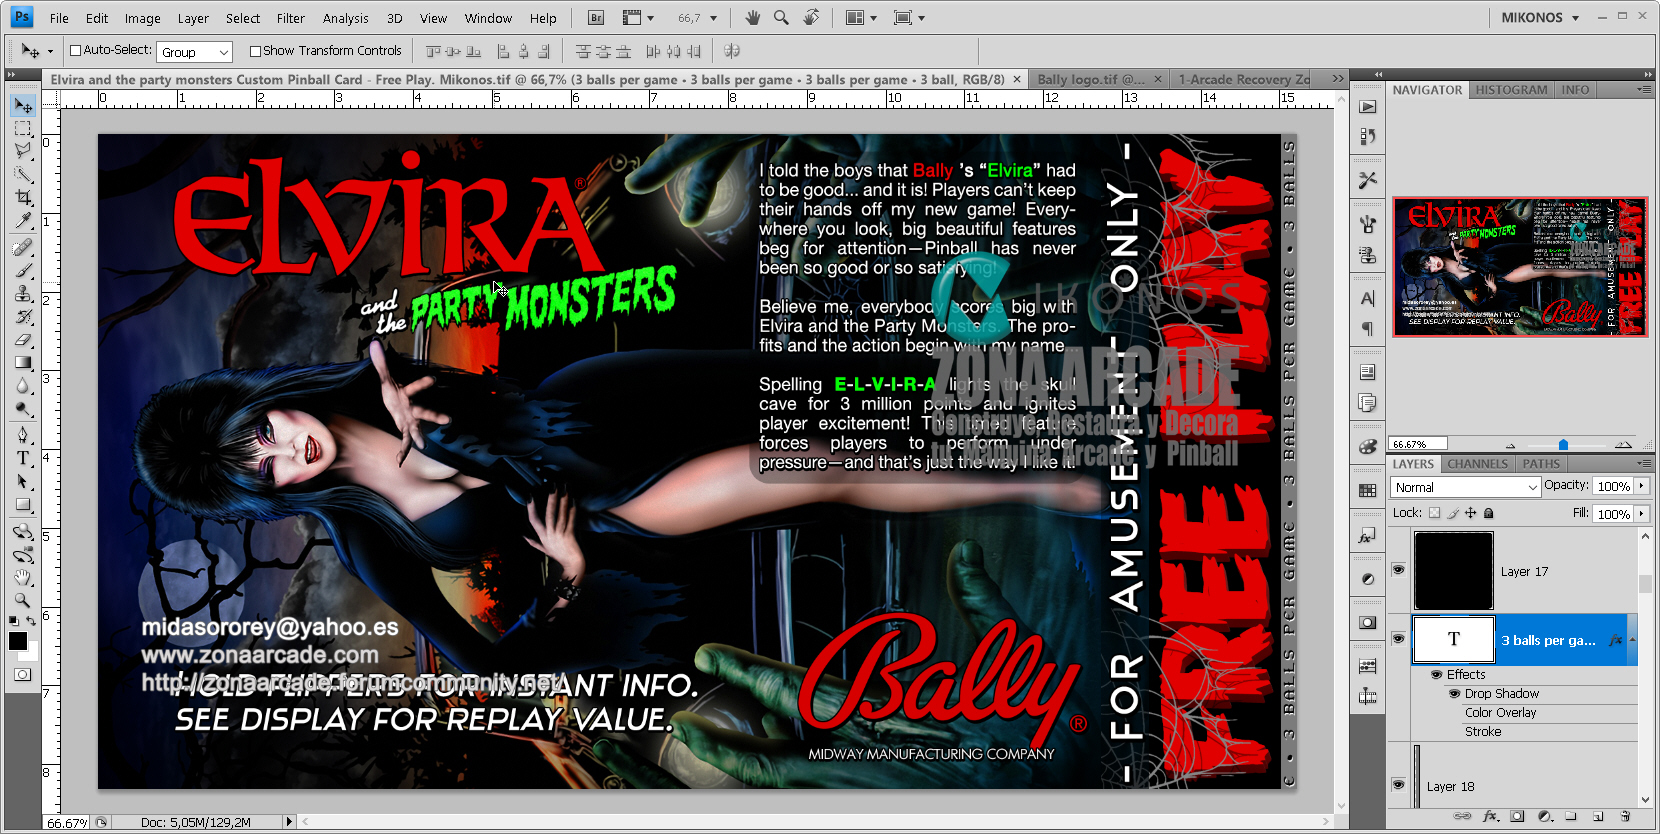 Elvira%20And%20The%20Party%20Monsters%20Pinball%20Card%20Customized%20-%20Free%20Play.%20Mikonos1.jpg